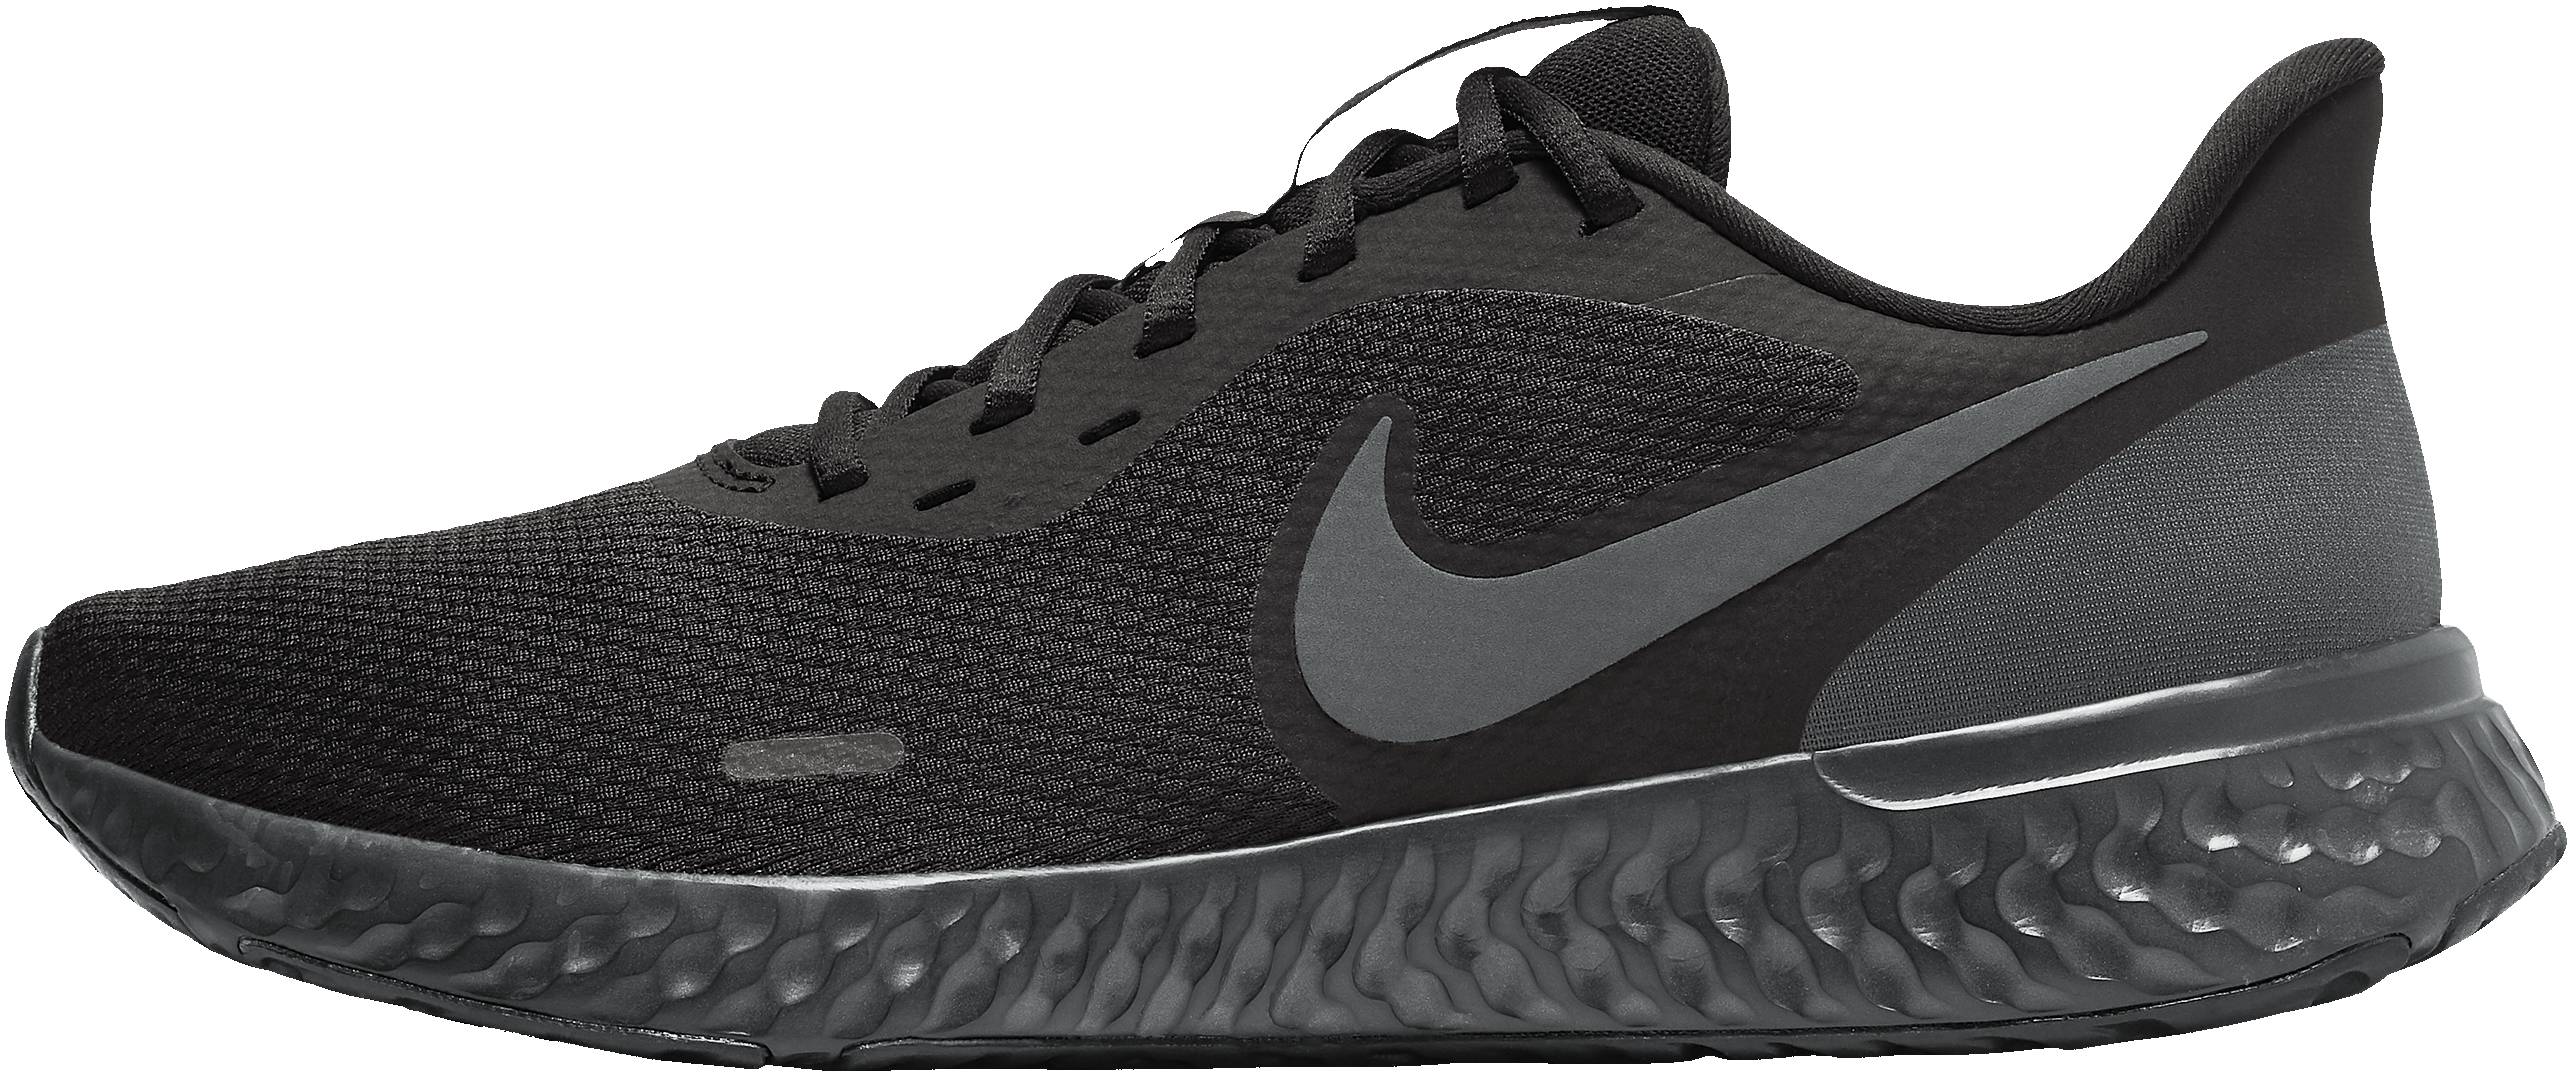 Nike Revolution all black nike training shoes 5 Review 2022, Facts, Deals ($45) | RunRepeat